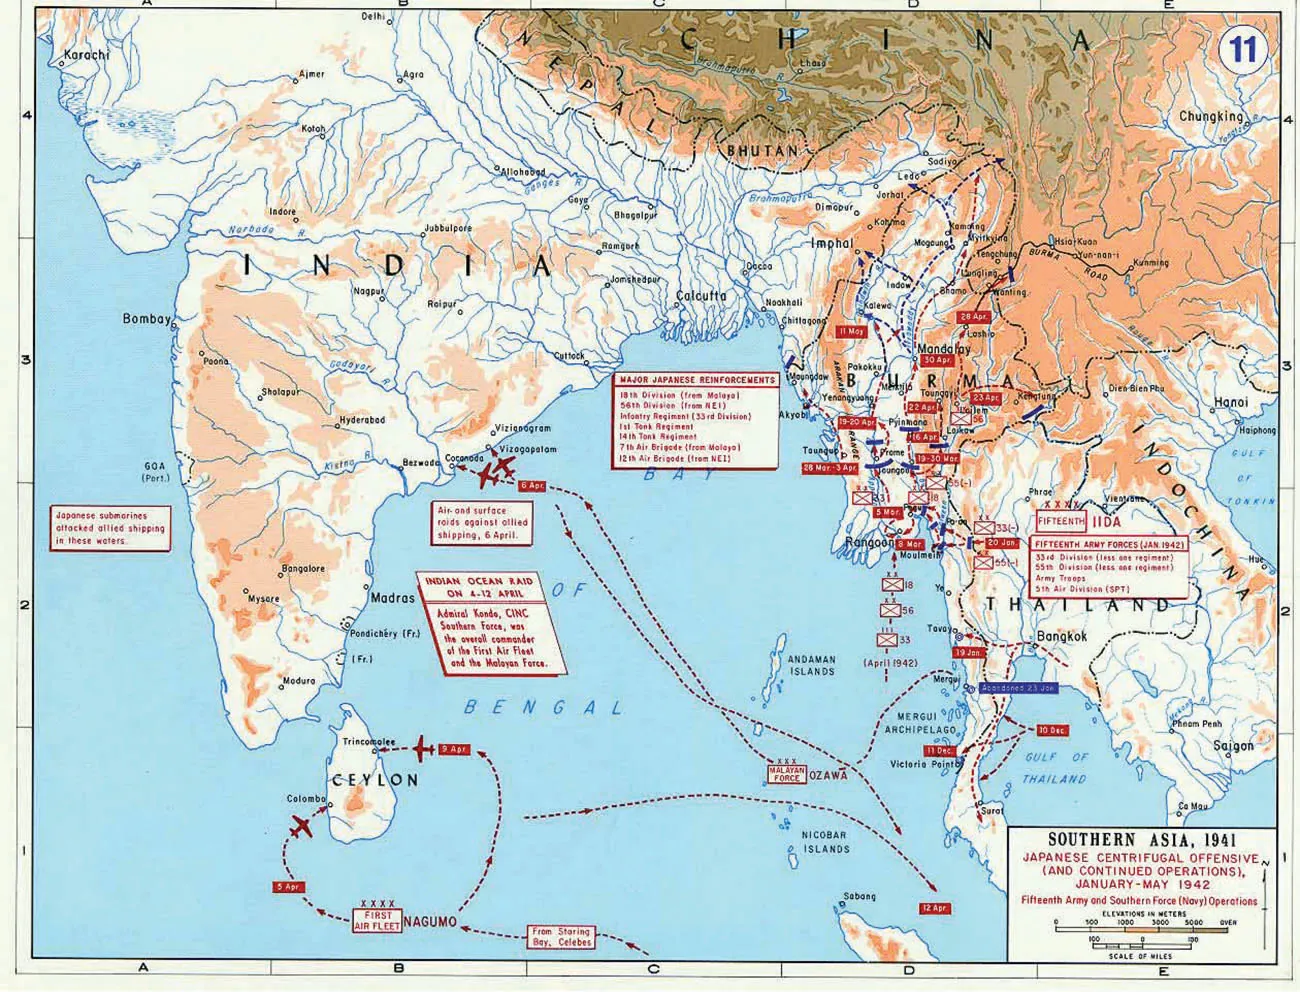 This is a map titled “Southern Asia, 1941. Japanese Centrifugal Offensive (and continued operations) January to May 1942. Fifteenth Army and Southern Force (Navy) Operations.” In this map, the following countries are shown: India, Bhutan, Nepal, Southern China, Burma, Indochina, Thailand, and Ceylon. The waters shown are the Bay of Bengal, Gulf of Thailand, and the Gulf of Tonkin and various rivers. To the west of India there is a label that reads ‘Japanese submarines attacked allied shipping in these waters.’ In northern Bay of Bengal there is a label that reads ‘Major Japanese Reinforcements: 18th Division (from Malaya); 56th Division (from NEI); Infantry Regiment (33rd Division); 1st Tank Regiment; 14th Tank Regiment; 7th Air Brigade (from Malaya); 12th Air Brigade (from NEI).’ On the east side of India there is a label that reads ‘Air and surface raids against allied shipping, 6 April.’ Below that another label reads ‘Indian Ocean Raid on 4-12 April. Admiral Kondo, CINC Southern France, was the overall commander of the First Air Fleet and the Malayan Force.’ There is a dotted line from the island of Mergui in the Mergui Archipelago, Thailand, to an island called Ozawa in the Bay of Bengal, labeled ‘Malayan Force,’ then going to the cities of Cocanada and Vizagapatam on the east coast of India. The dotted lines are labeled by an airplane at the ends. There is a dotted line labeled with an airplane leaving this area, travelling southeast past the island of Ozawa to the southeastern portion of the Bay of Bengal. There is a dotted line travelling from the bottom of the map, labeled ‘From Staring Bay, Celebes’ splitting into two dotted lines at a label that says “Nagumo.” One goes to the western city of Colombo on the western coast of Ceylon, labeled ‘First Air Fleet,’ and then with and airplane and another label ‘5 Apr.’ The other branch of the dotted line goes to the eastern city of Trinconalee on the eastern coast of Ceylon. It is labeled with an airplane and the label ‘9 Apr.’ A dotted line goes east out of the middle of this dotted line, over the Nicobar Islands in the south of the Bay of Bengal and continues by the southwest coast of Thailand in the water, labeled ‘12 Apr.’ A label with ‘Abandoned 23 Jan’ is located east of the city of Mergui in Thailand. Three dotted lines labeled ’10 Dec” go out from the Gulf of Thailand to two places on the western coast of Thailand, with the middle one ending at Victoria point with the label ’11 Dec.’ A dotted line extends from southeast of Bangkok, goes through Bangkok, and splits into two. One portion heads west to Tavay, Thailand with the label ’19 Jan’. while the second part goes south to the city of Surat. In the middle of the map of Thailand, there is a label with “Fifteenth” as well as one with ‘Fifteenth Army Forces (Jan 1942); 33rd Division (less one regiment); 55th Division (less one regiment); Army Troops; 5th Air Division (SPT).’ A dotted line comes out of an area in the Bay of Bengal north of the Mergui Archipelago, labeled ‘(Apr 1942)’, then with a white box with a red ‘x’ through it, and the number ‘33’, followed by another white box with a red ‘x’ through it, with the number ‘56’, followed by another white box with a red ‘x’ through it, and the number ‘18’, ending in the city of Moulmeth with the label ‘8 Mar.’ In the western portion of Thailand, there are two white boxes with a red ‘x’ through them, one with the label 33(-) to its right, and another with ‘55(-)’ to its right. There is a label with ’20 Jan’ between them. Throughout the country of Burma, there are arrows heading north, with various labels: ‘5’Mar’ and a white box with a red ‘x’ and the number ‘18’ at the city of Pegu, to the west of Pegu there is a white box with ‘33’ and a white box to the northeast with ‘55(-)’ to its right. To the east of the city of Toungoo there is a label with ’28 Mar-3 Apr’ and to its east there is a label with ’19-30 Mar’. Southwest of the city of Loi-Kaw, there is a label with ’16 Apr’ and to its northeast there are labels with ’23 Apr’ and a white box with a red ‘x’ with the number ‘56’ to its right. To the city’s northwest there is a label with ’22 Apr.’ South of the city of Yenangyaung there is a label with ’19-20 Apr.’ South of the city of Mandalay there is a label with ’30 Apr’ and northeast of the city of Lashio there is a label with ’28 Apr.’ Southwest of the city of Pakokku there is a label with ’11 May’. In the northern portion of Burma there are various dotted lines that head in curved directions up toward China.